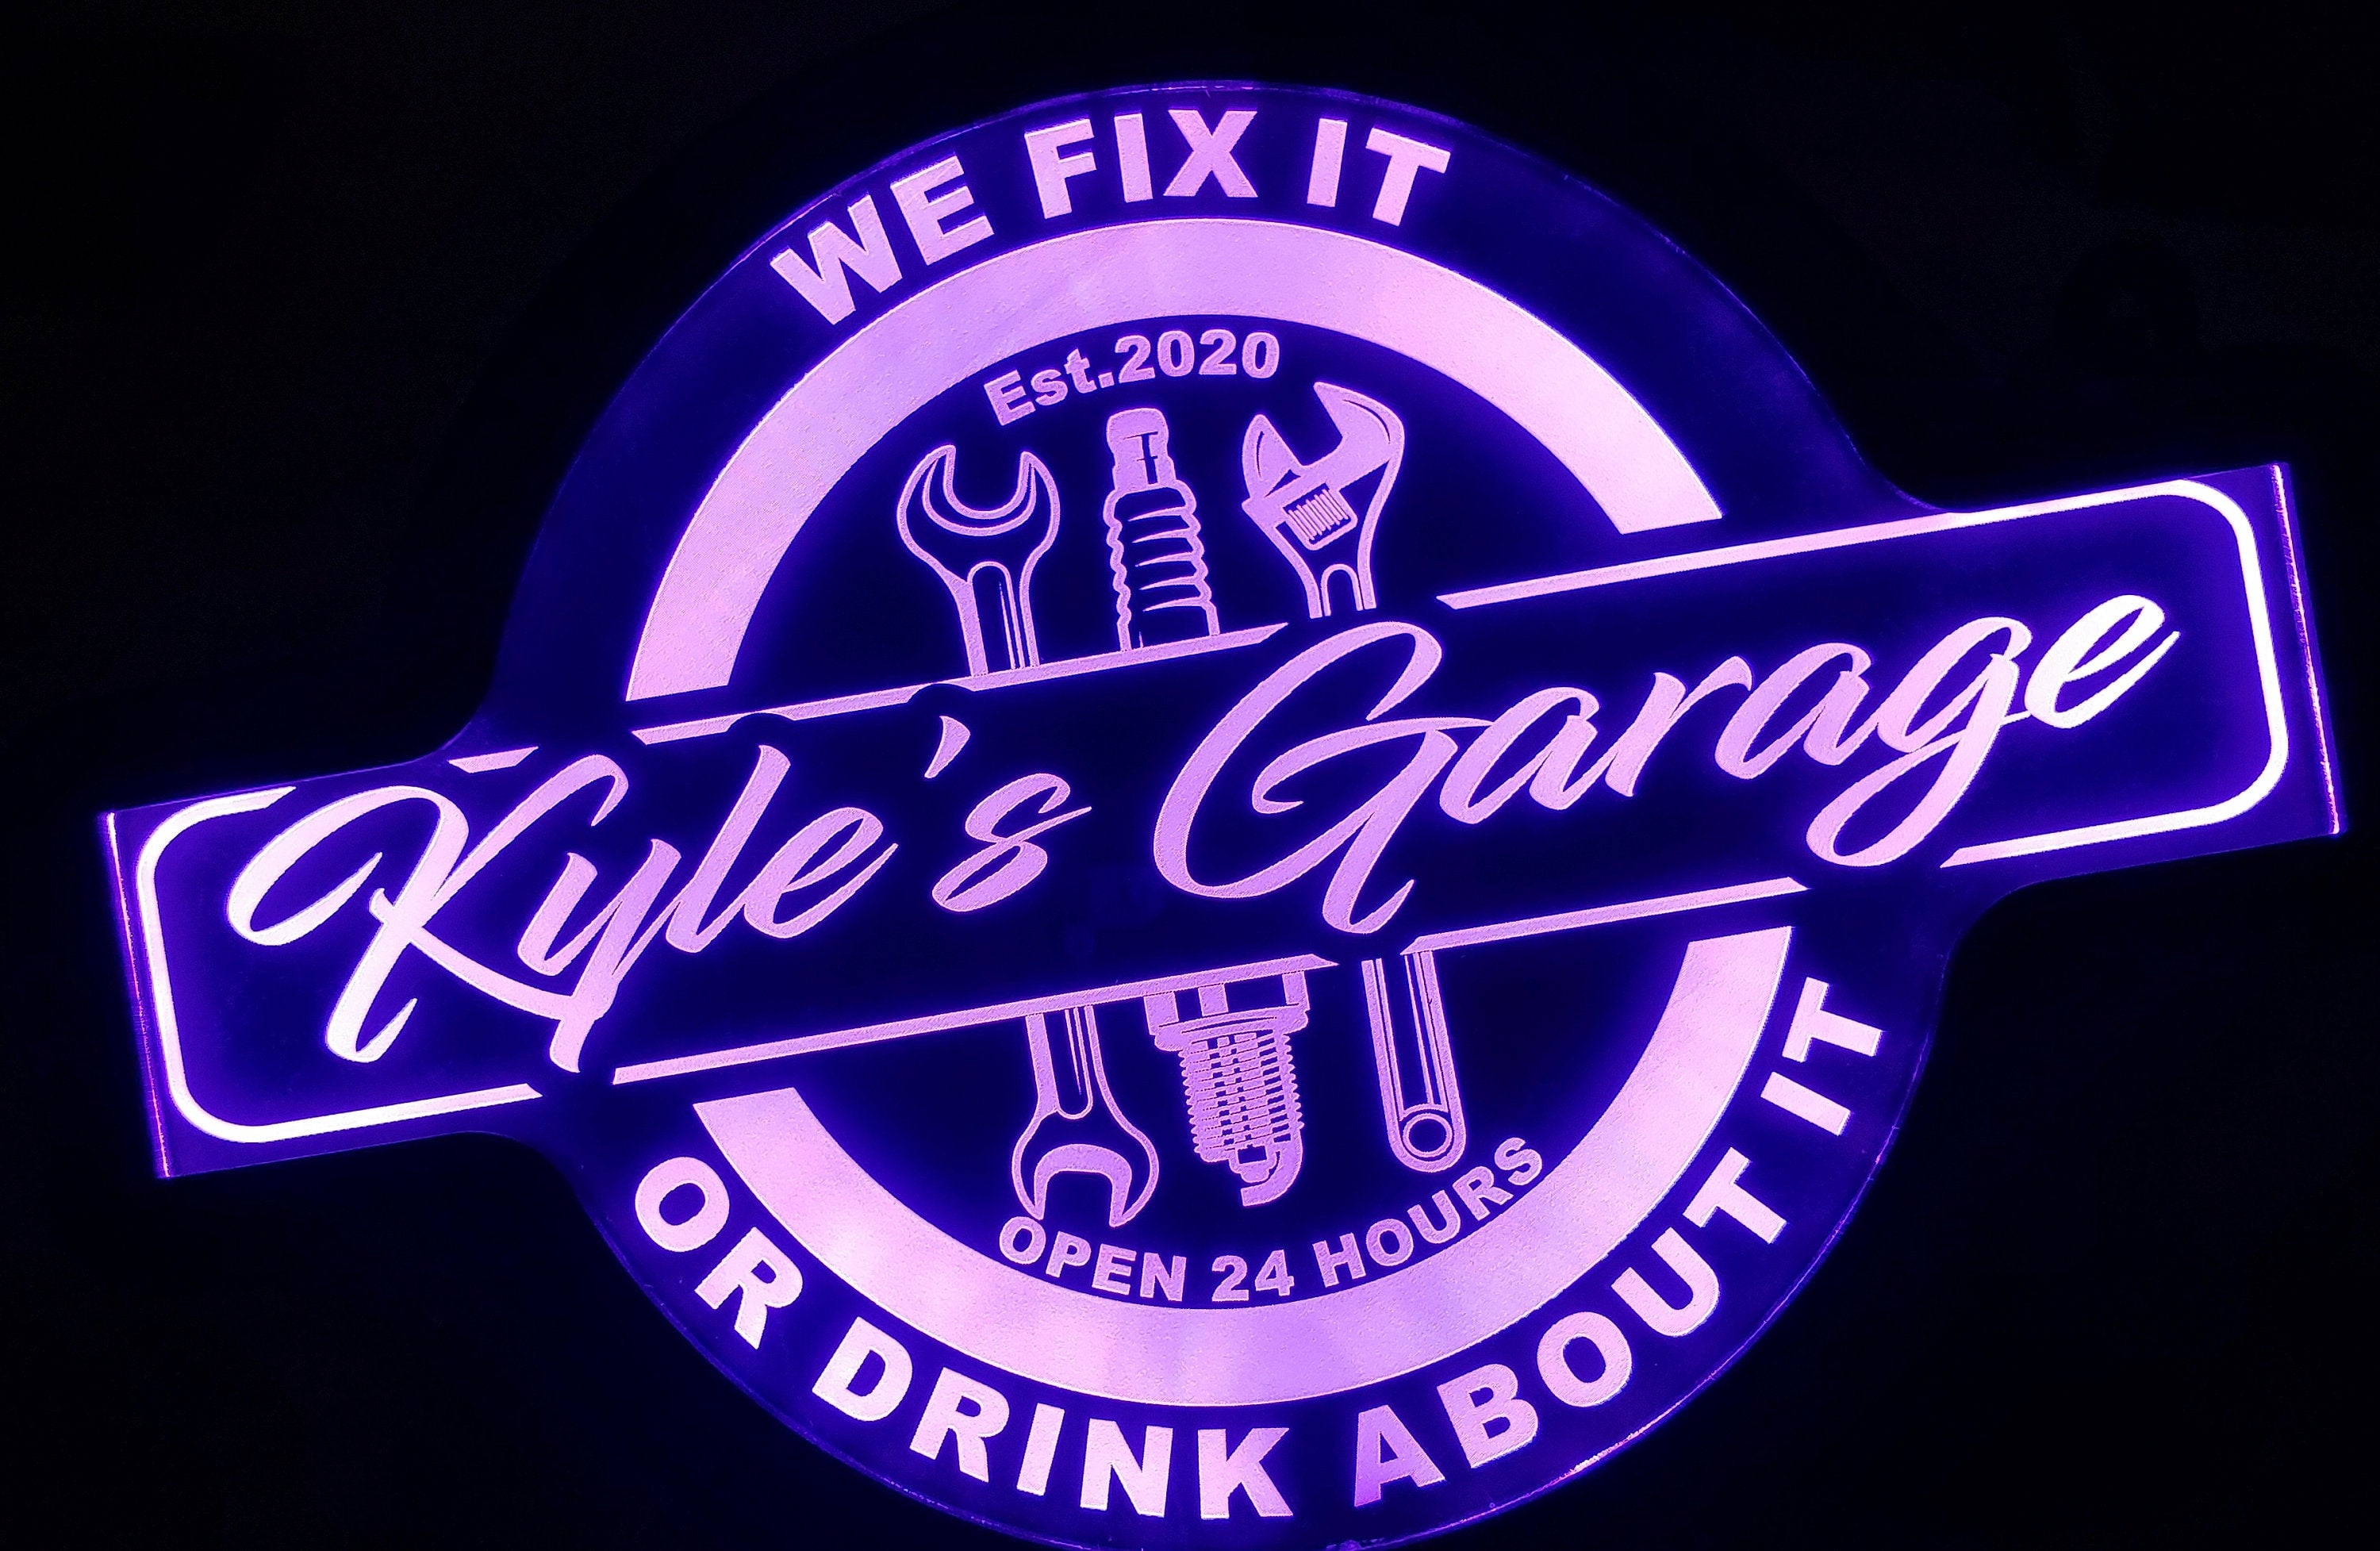 Custom My Tools, My Rules Garage Wall Led Sign Night Light Neon Like - Color Changing - 4 Sizes - Free Shipping